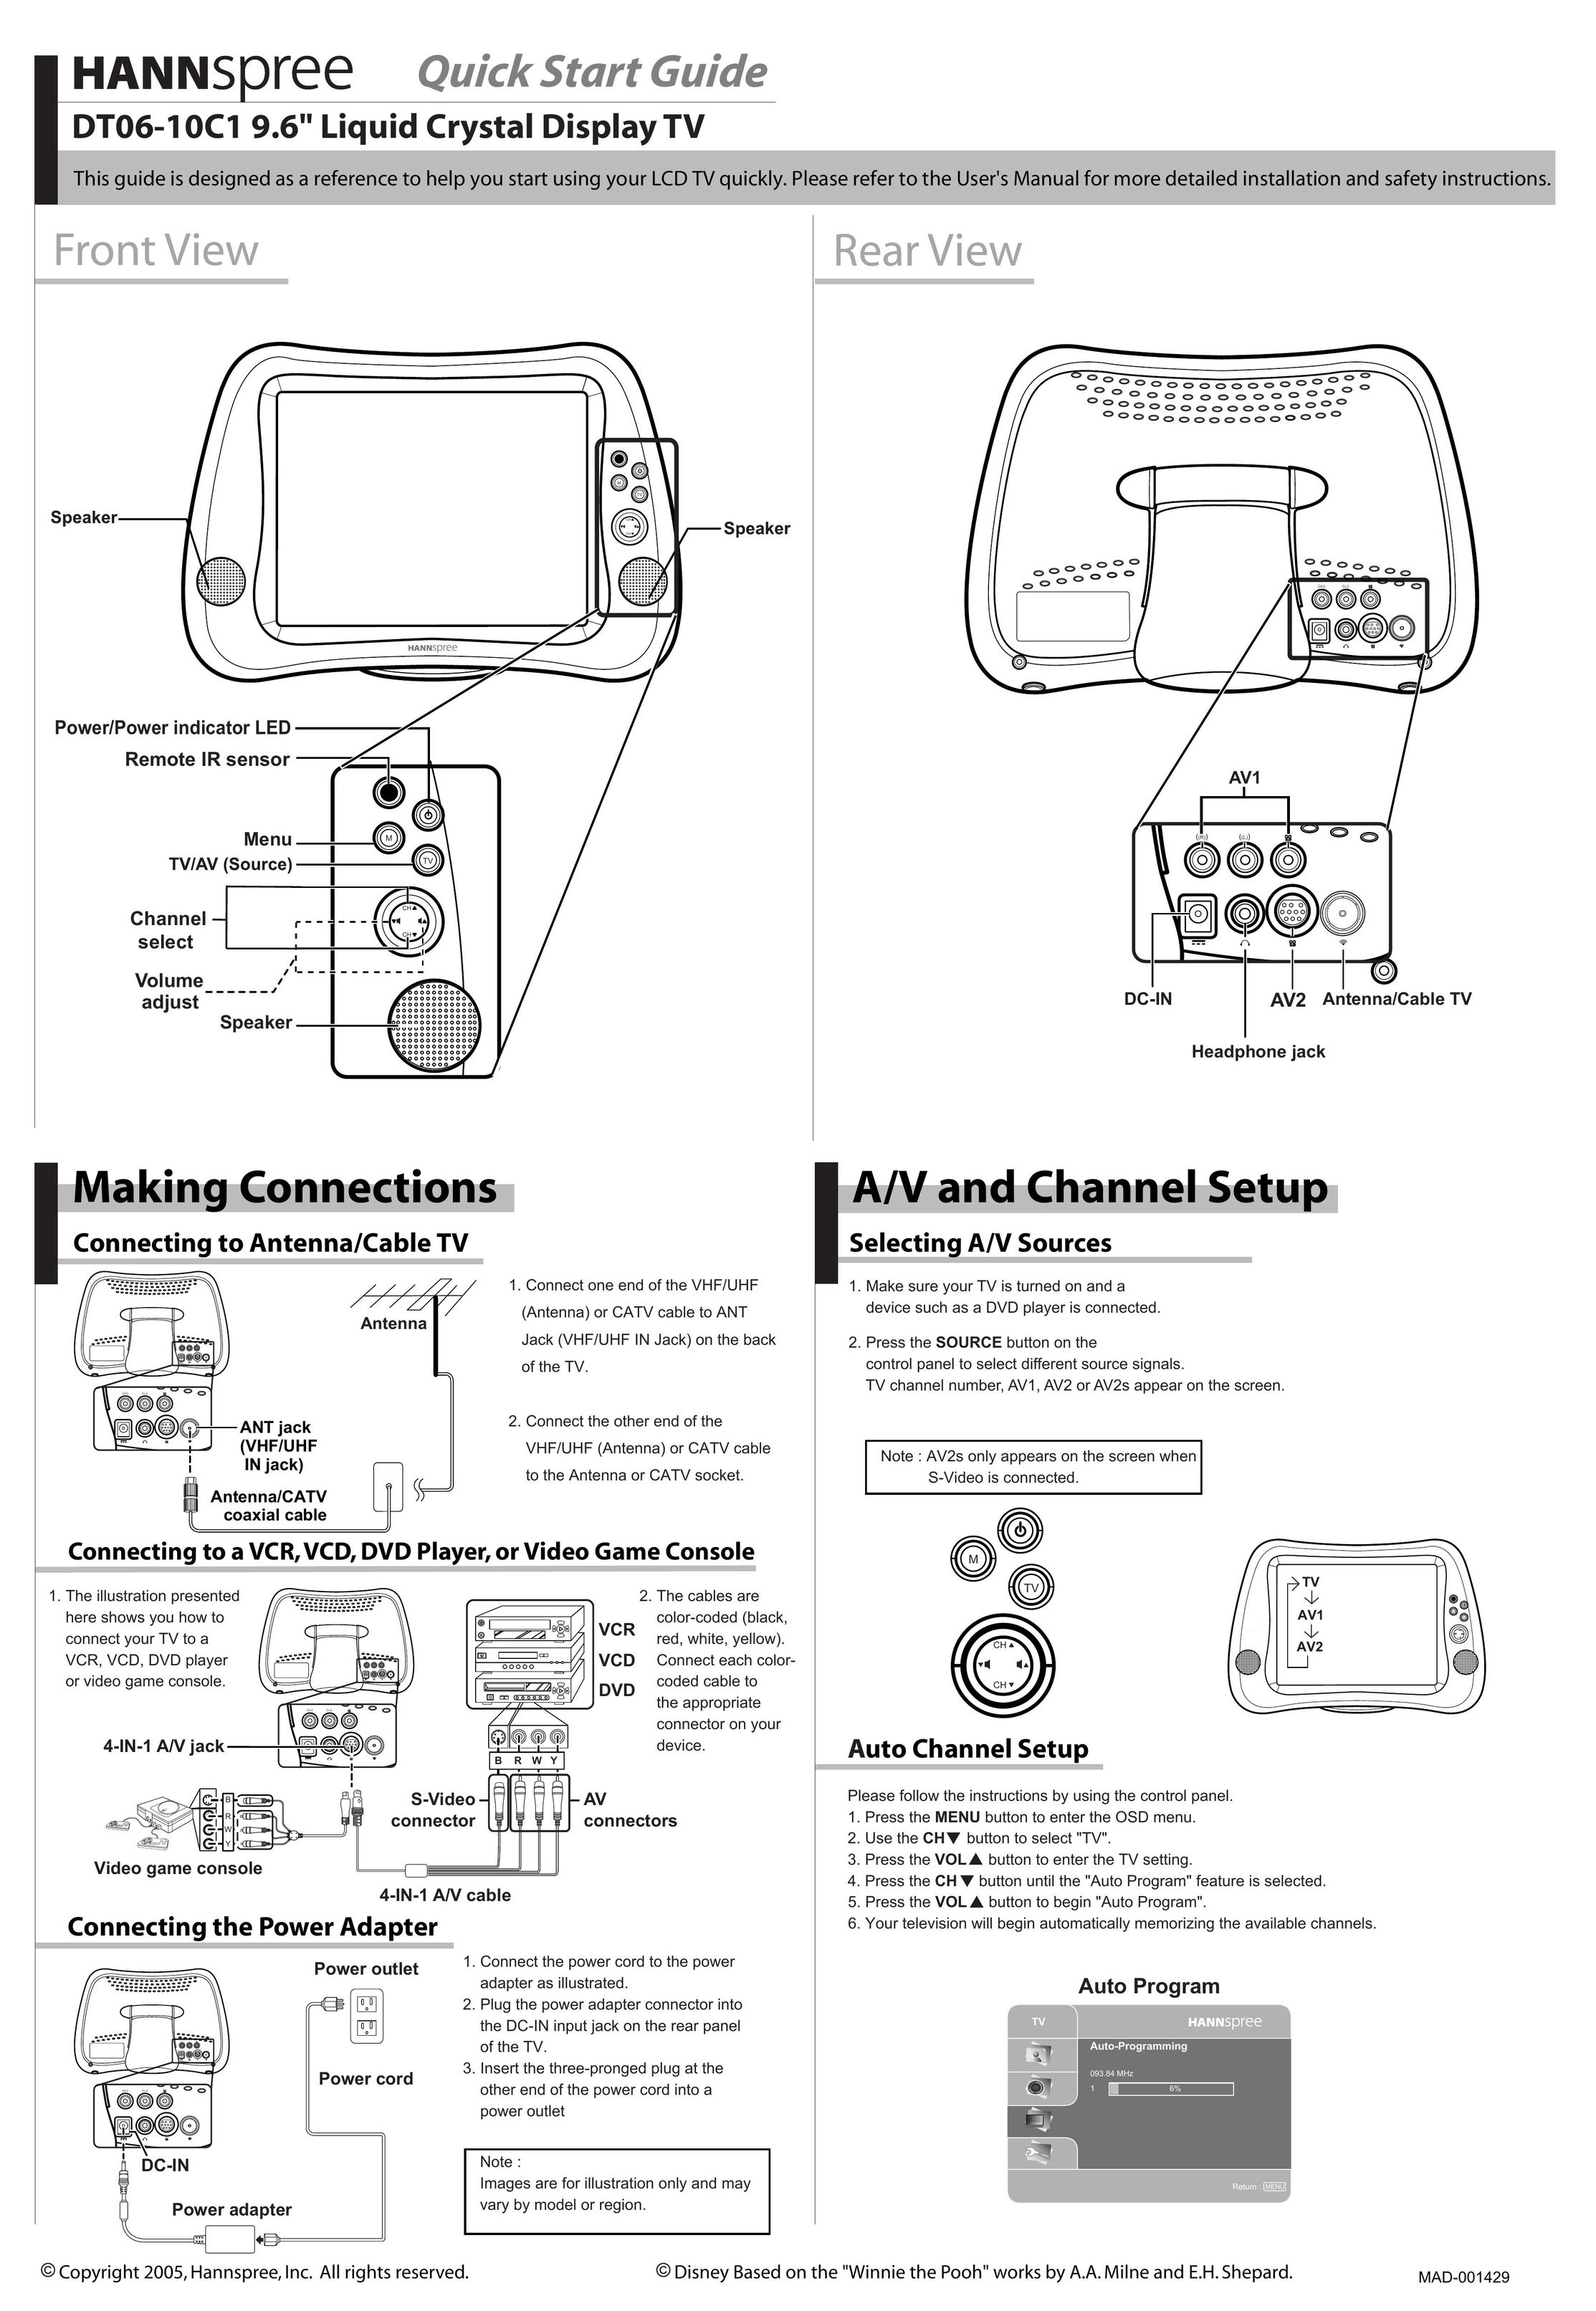 HANNspree DT06-10C1 Flat Panel Television User Manual